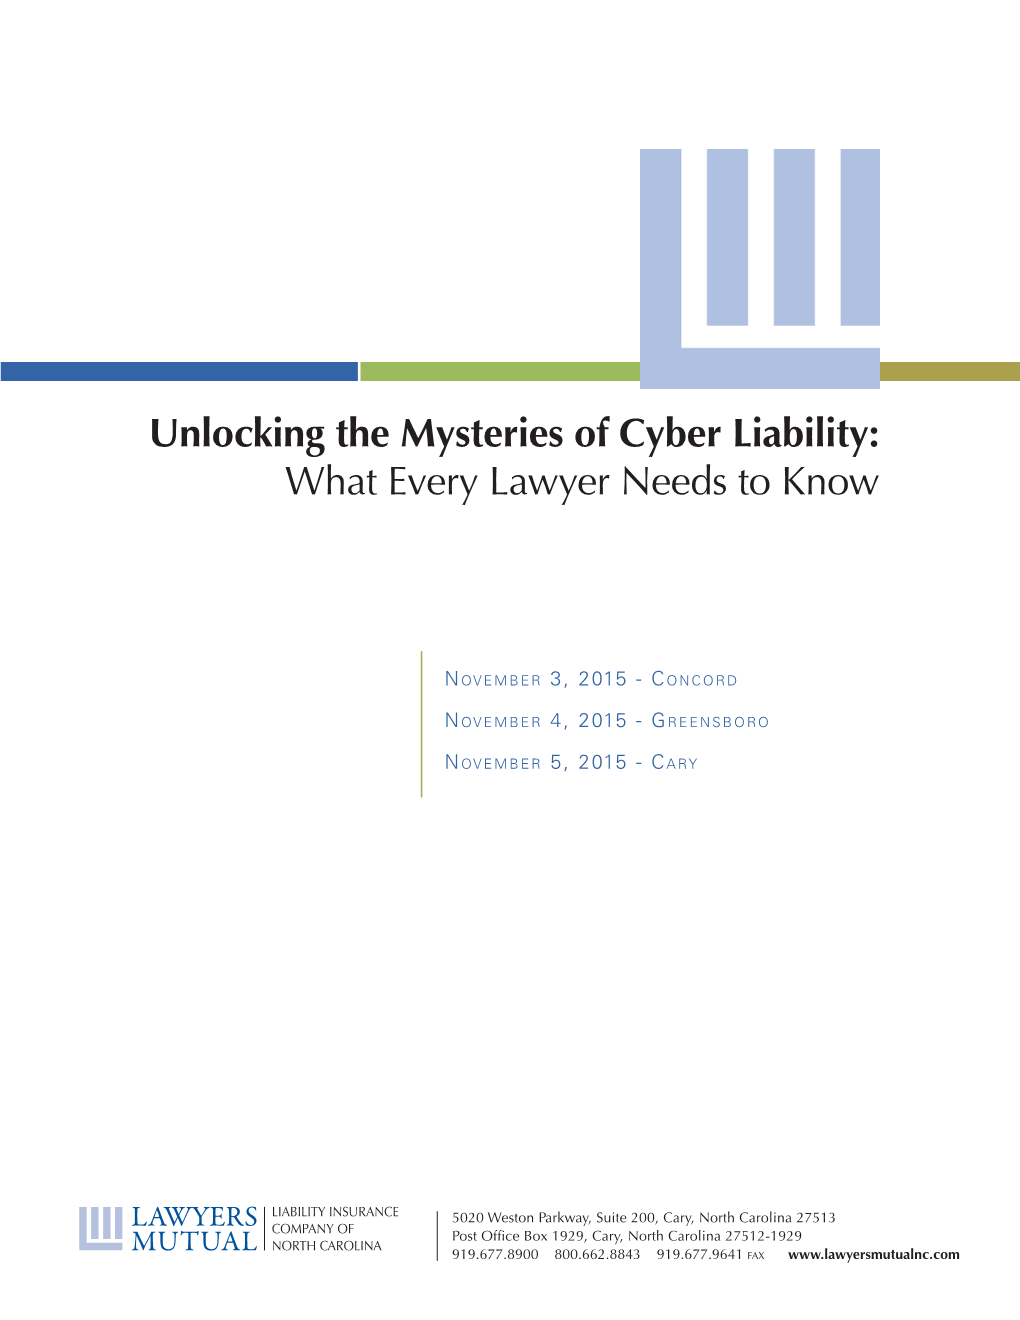 Unlocking the Mysteries of Cyber Liability: What Every Lawyer Needs to Know